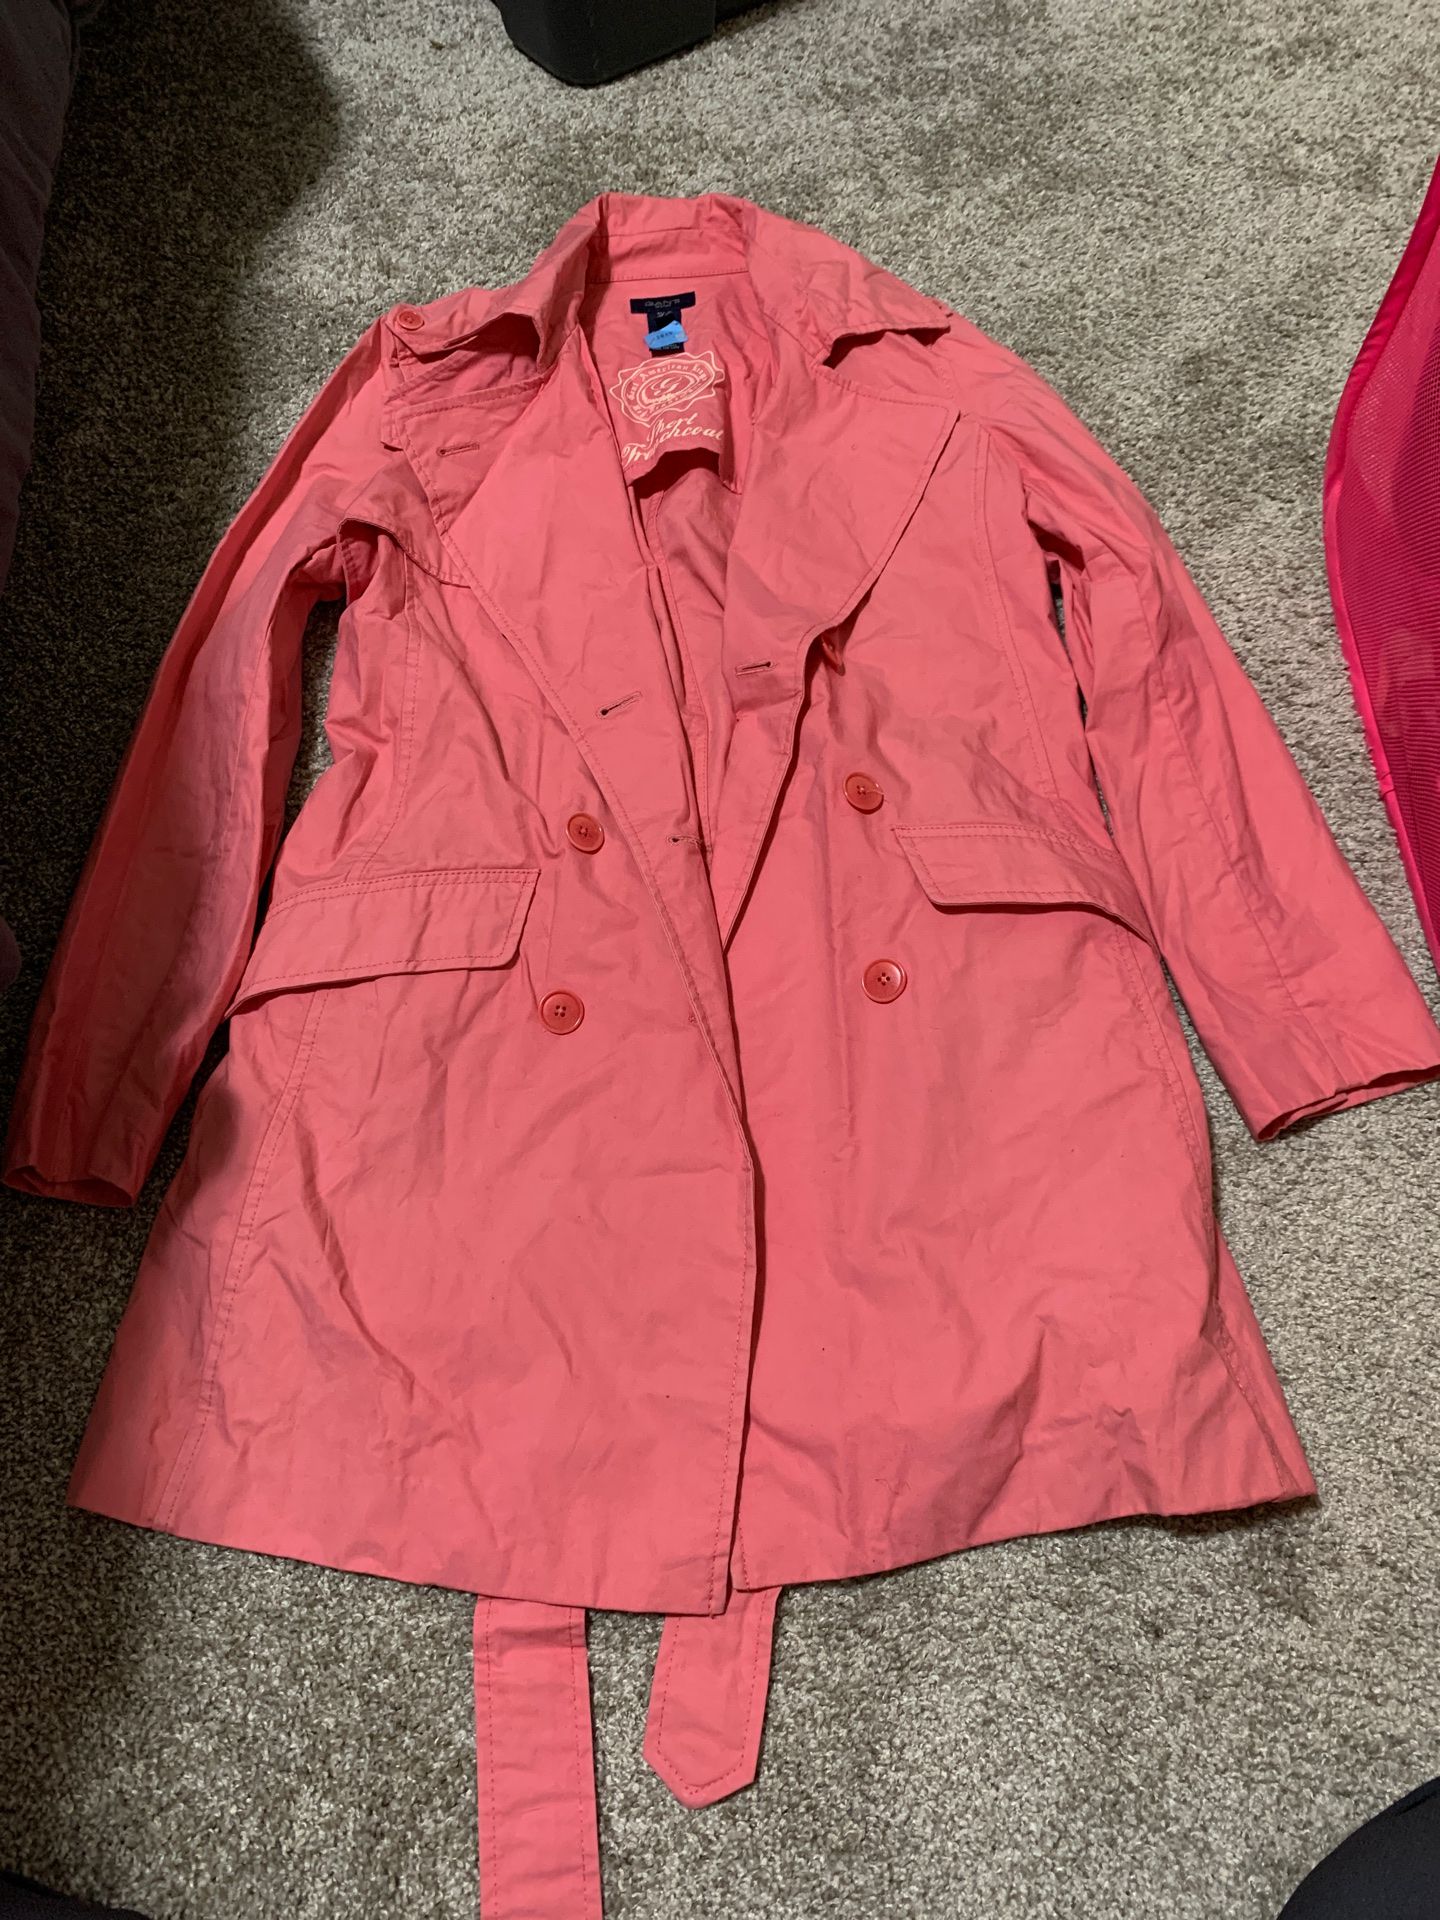 Gant short trench coat size M in like new condition, $90 obo